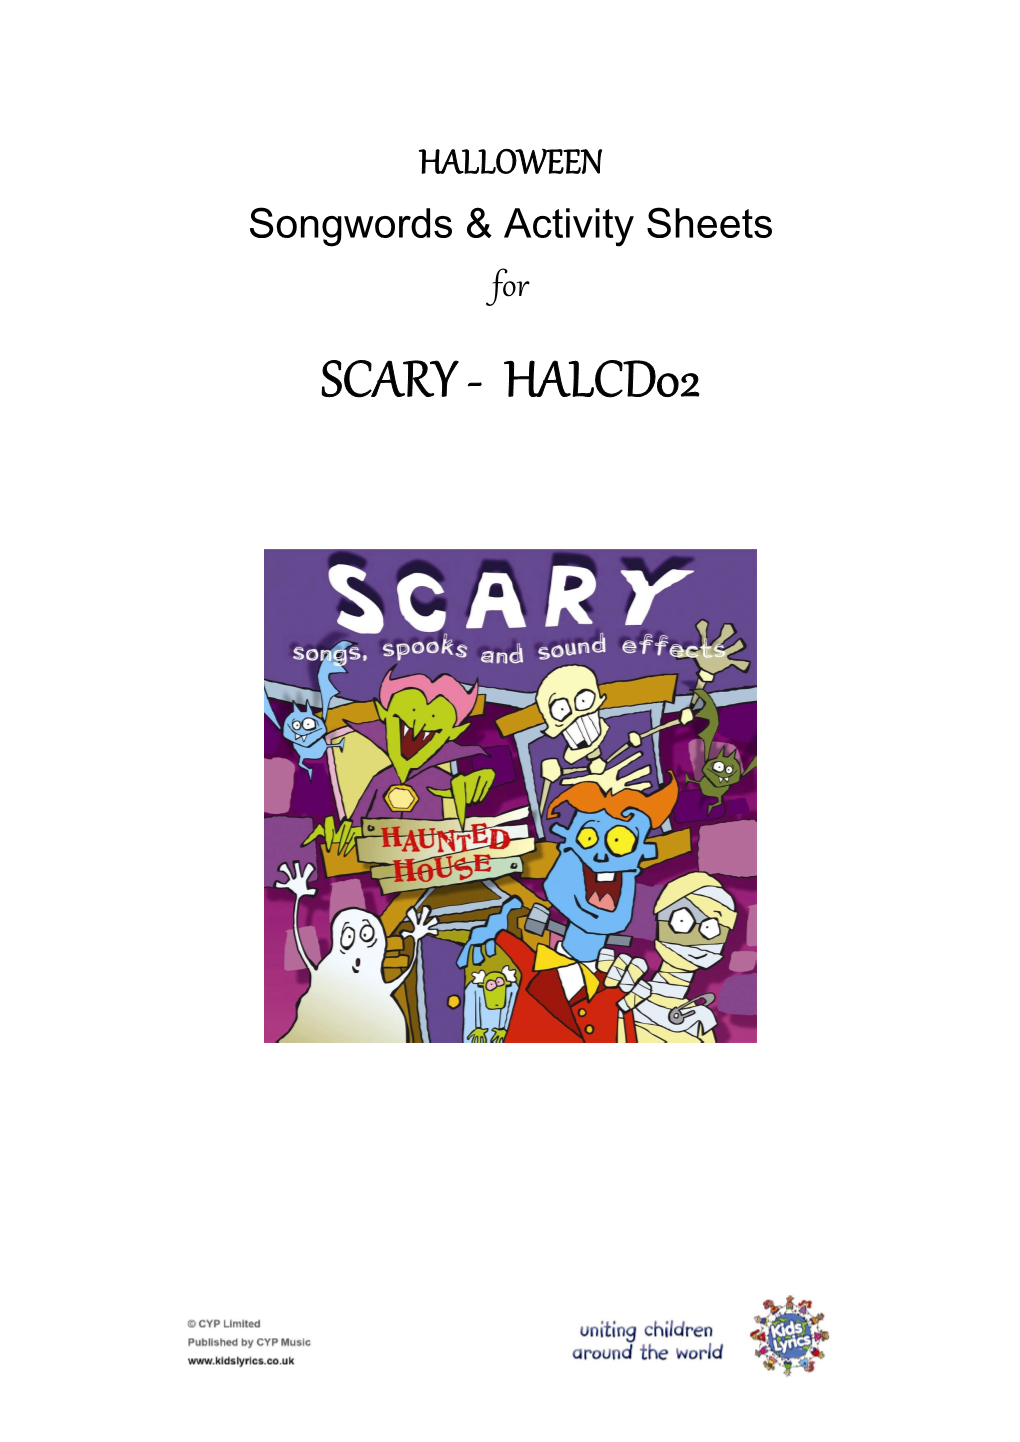 Scary - Halcd02 Contents